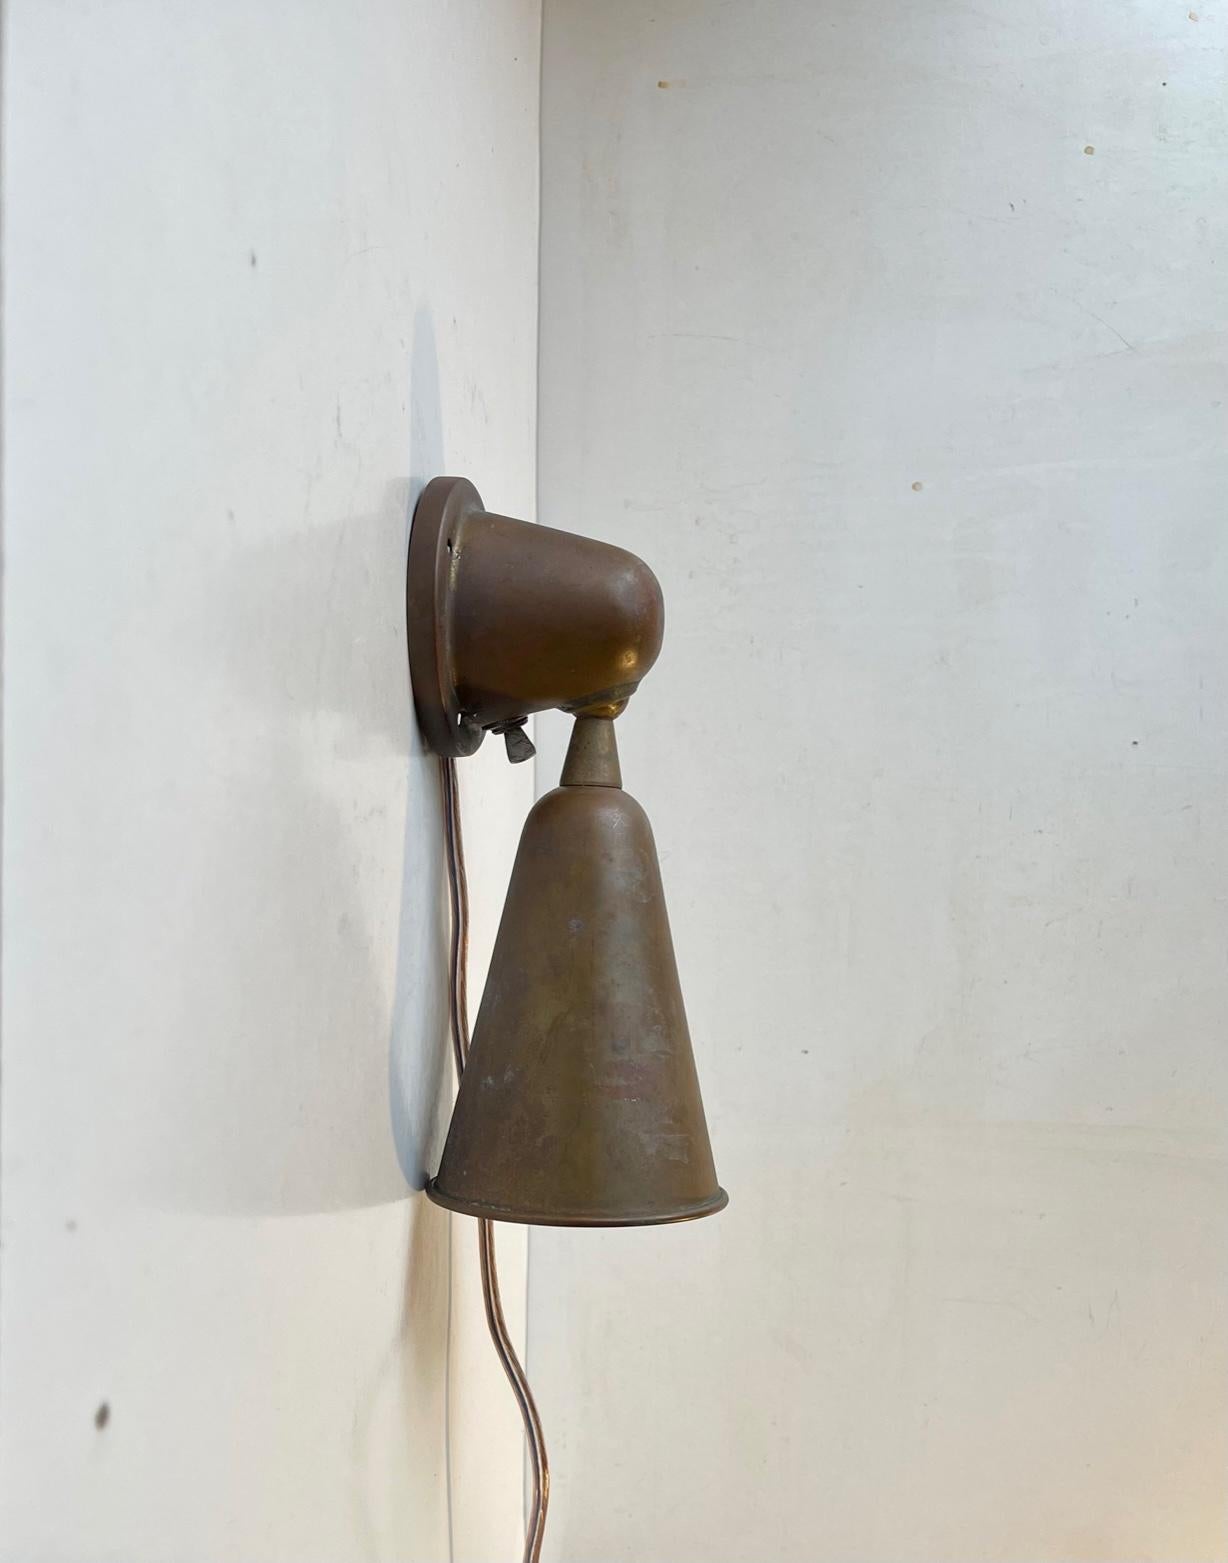 Mid-20th Century Nautical Bauhaus Era Wall Sconce in Patinated Copper, 1930s For Sale